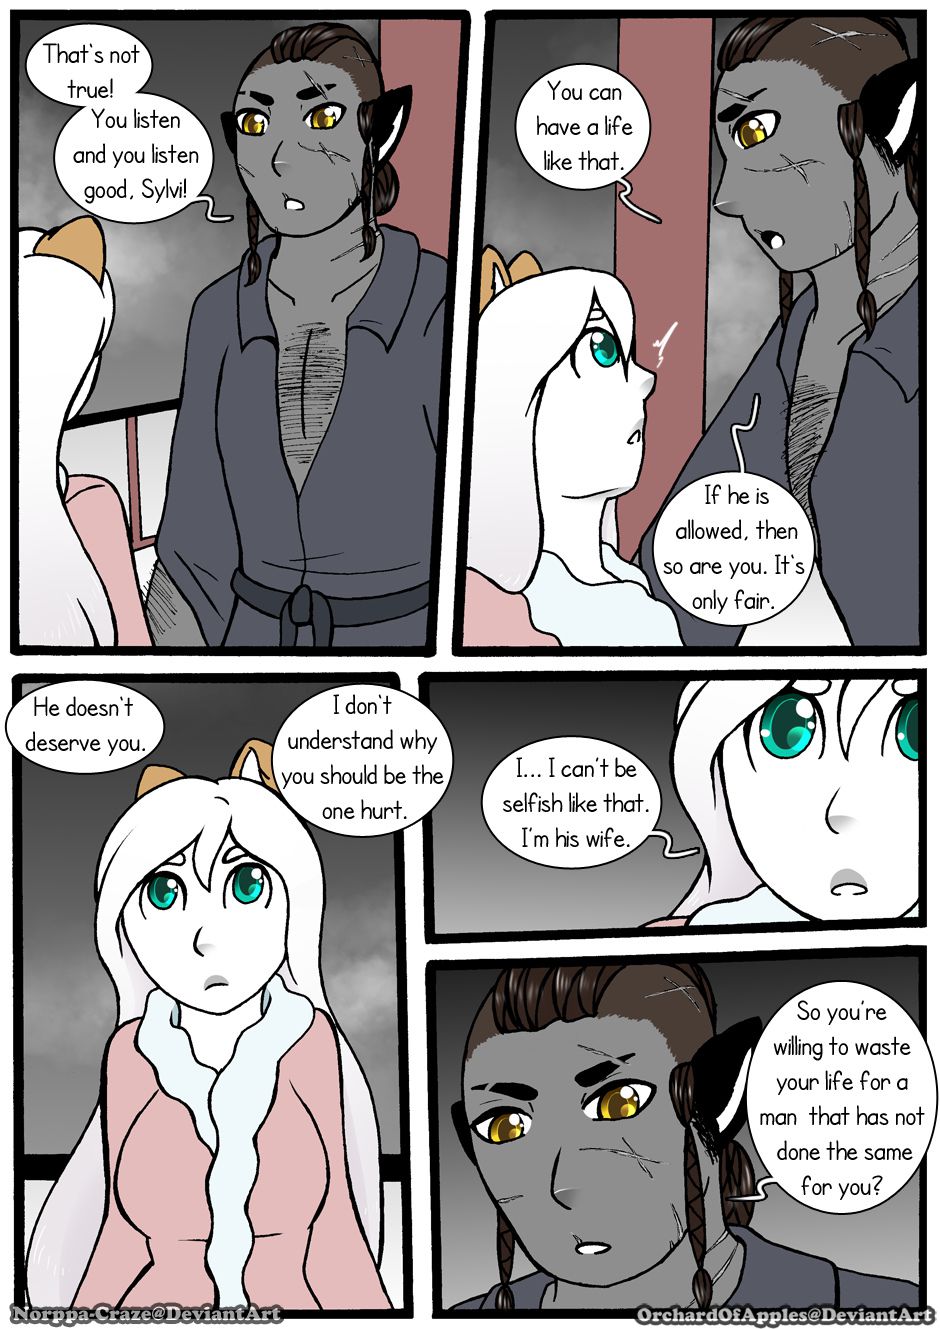 [Jeny-jen94] Between Kings and Queens [Ongoing] 341